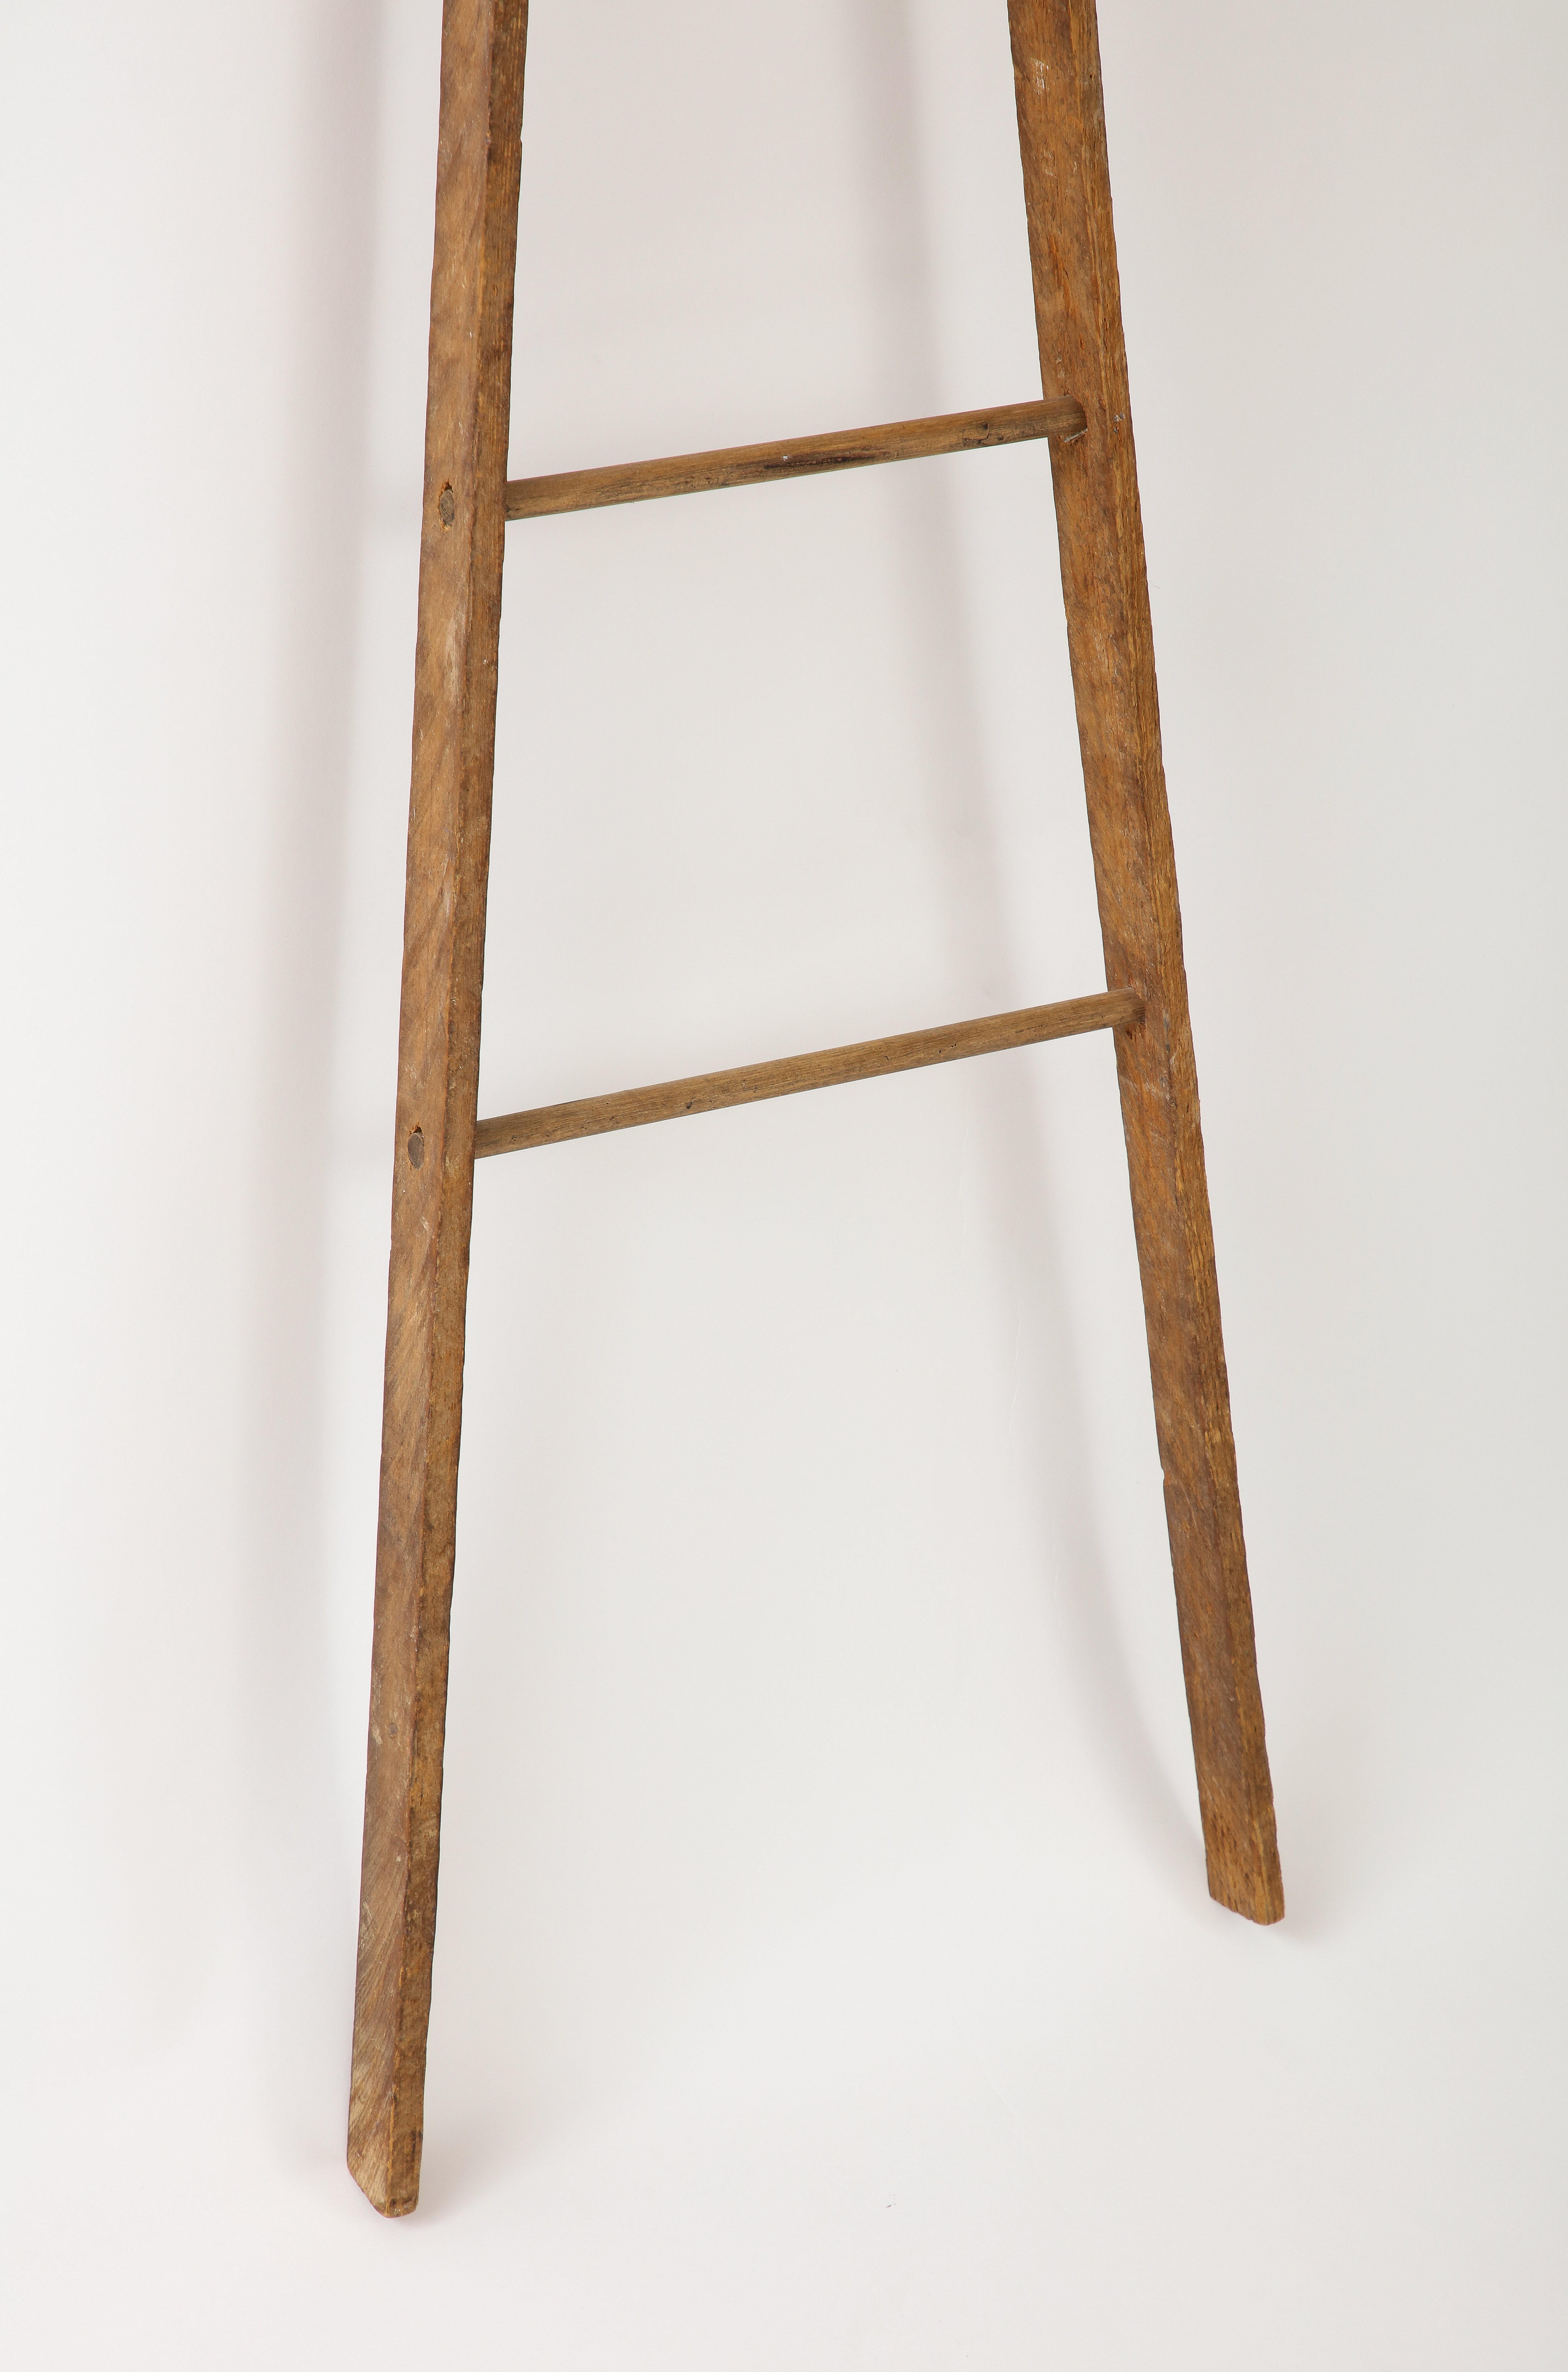 American 19th C. Ladder Model For Sale 2